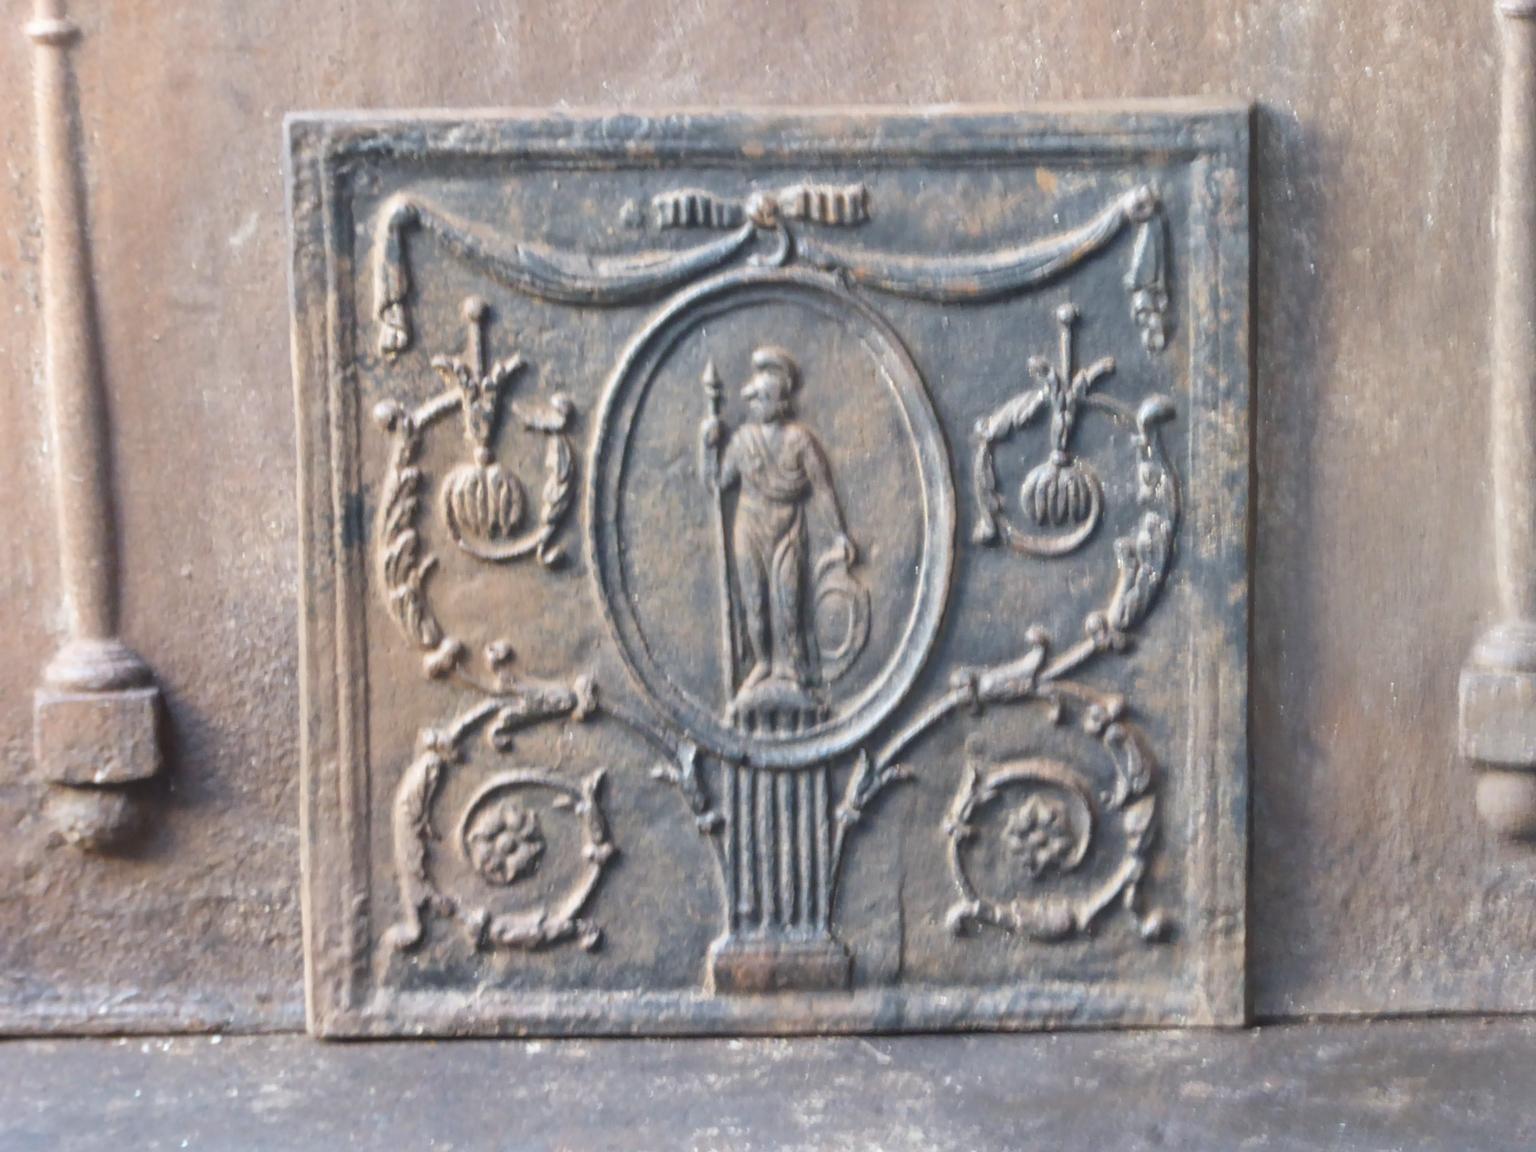 French fireback with the goddess Minerva. Goddess of knowledge, intellect and ingenuity of the human spirit. She is often depicted with an owl, symbol of wisdom. The 20th century fireback has a neoclassical style. The fireback is made of cast iron